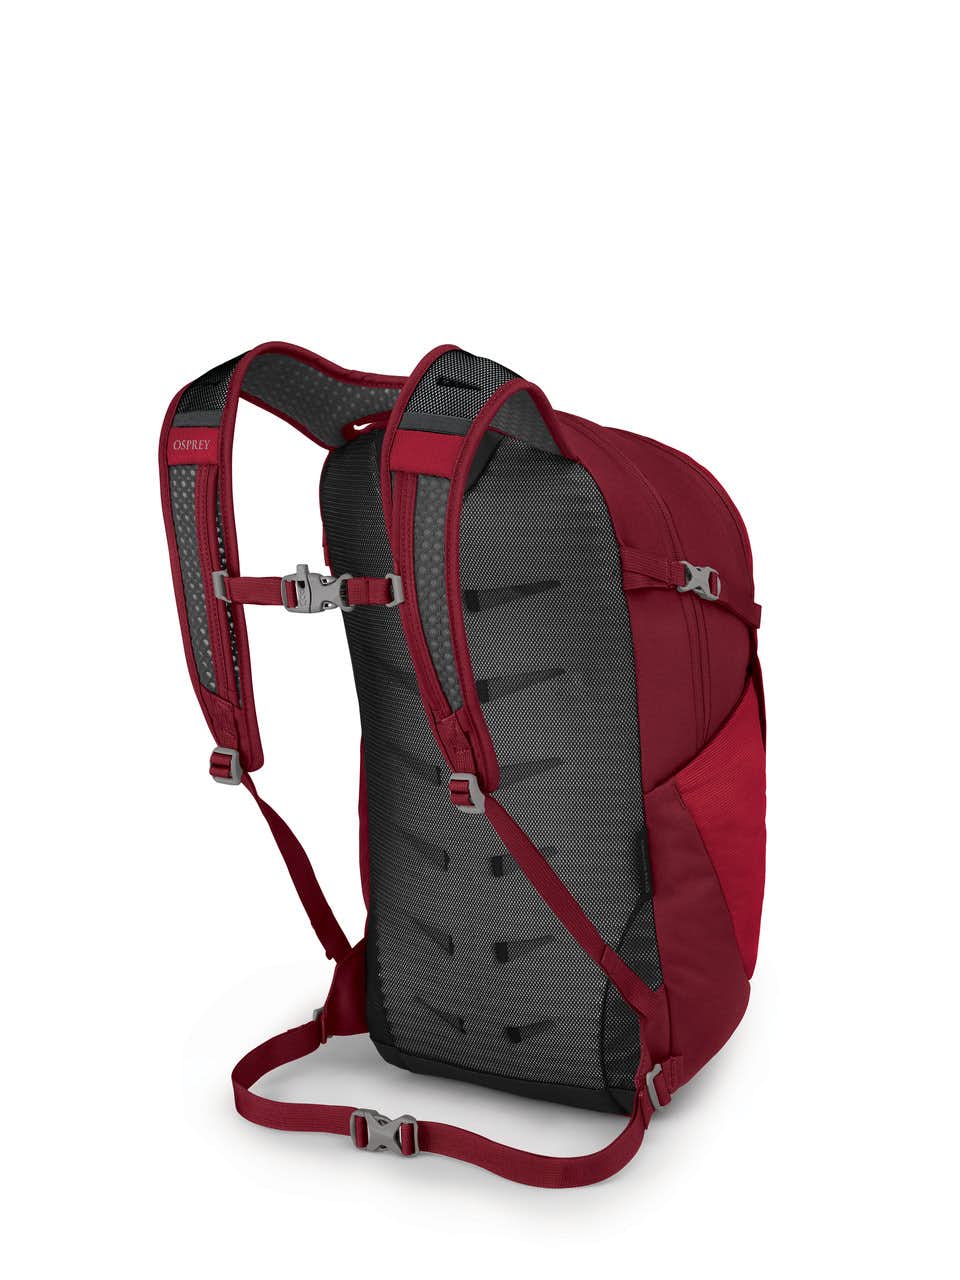 Daylite Plus Pack Cosmic Red